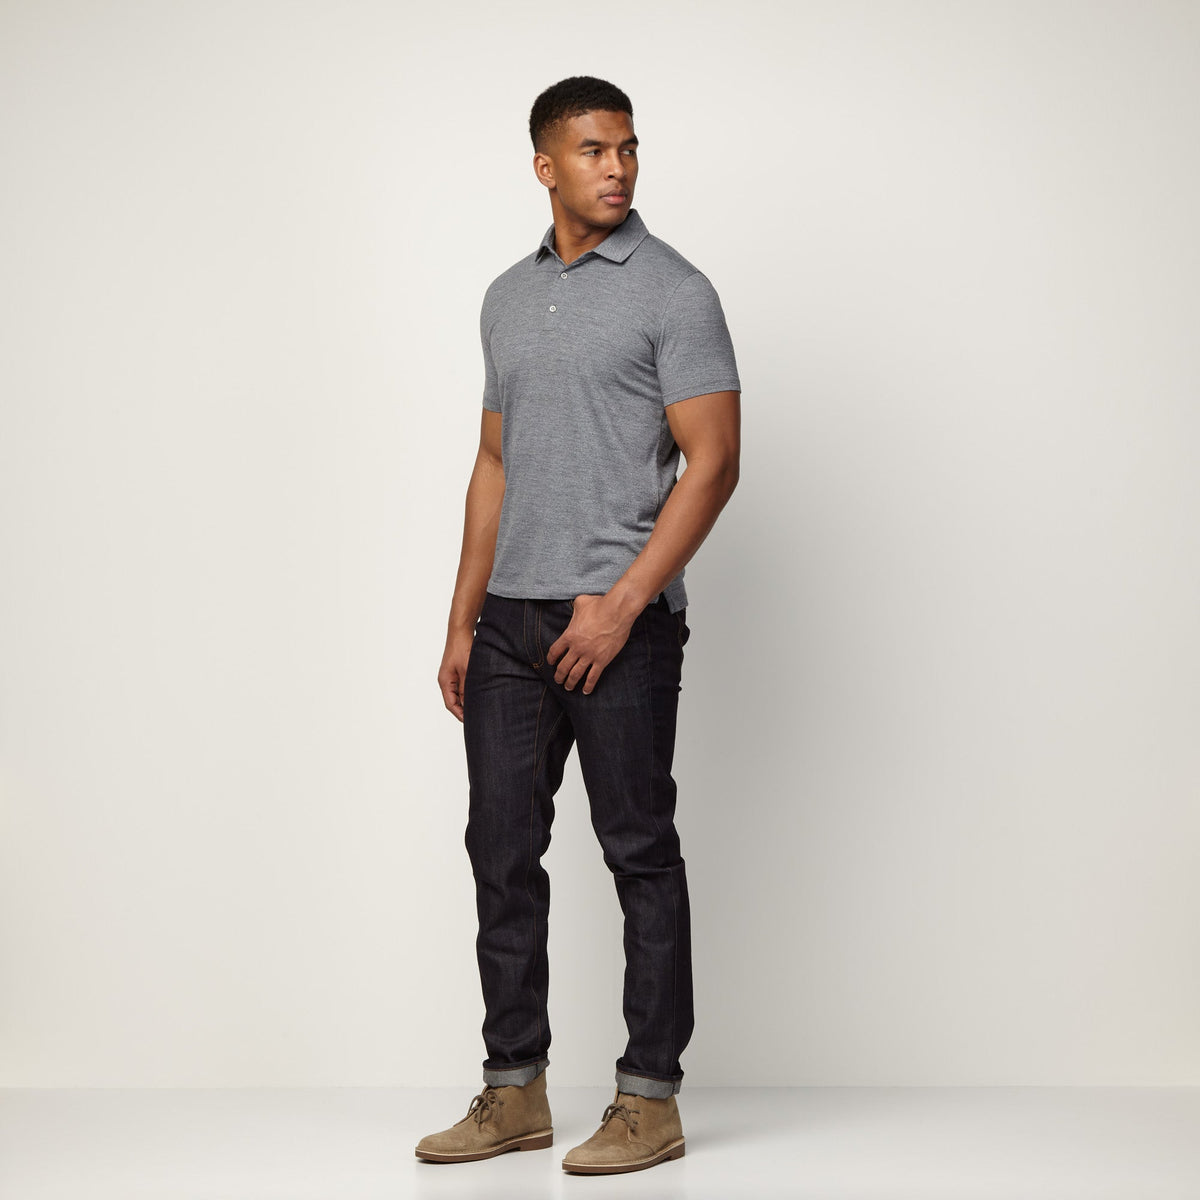 image-on-hover,model-spec: Micah is 6'1", 185 lbs, and wears 33